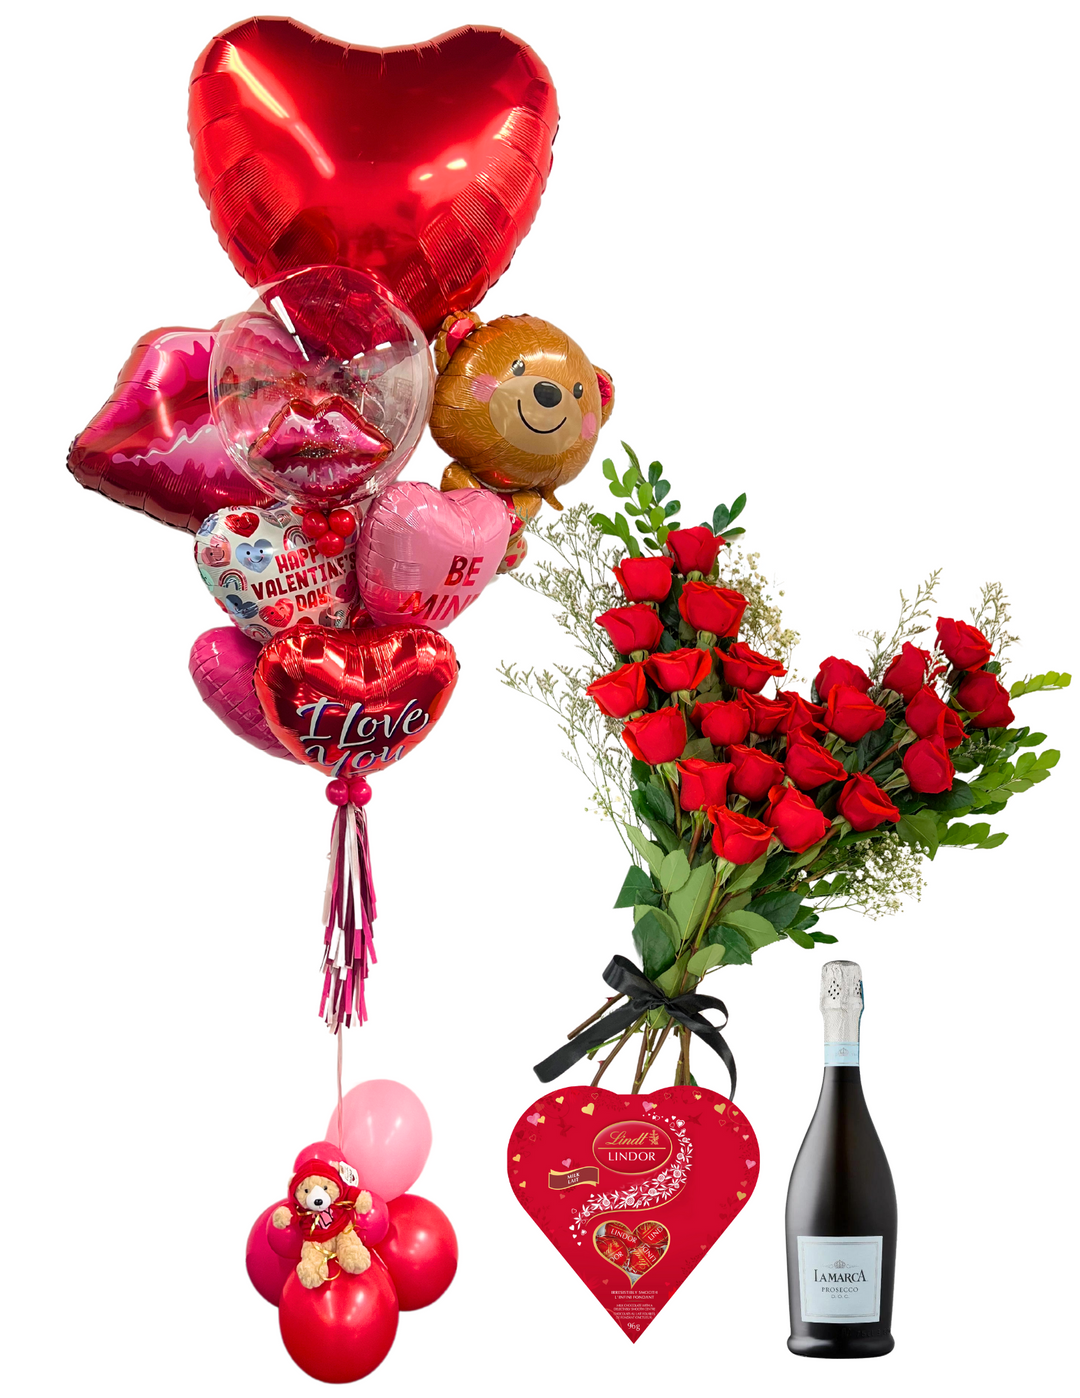 The Ultimate Valentine's Day Package - 1 Jumbo Foil Balloon Bouquet, A Teddy Bear, Chocolates, 24 Red Roses & a Bottle of La Marca